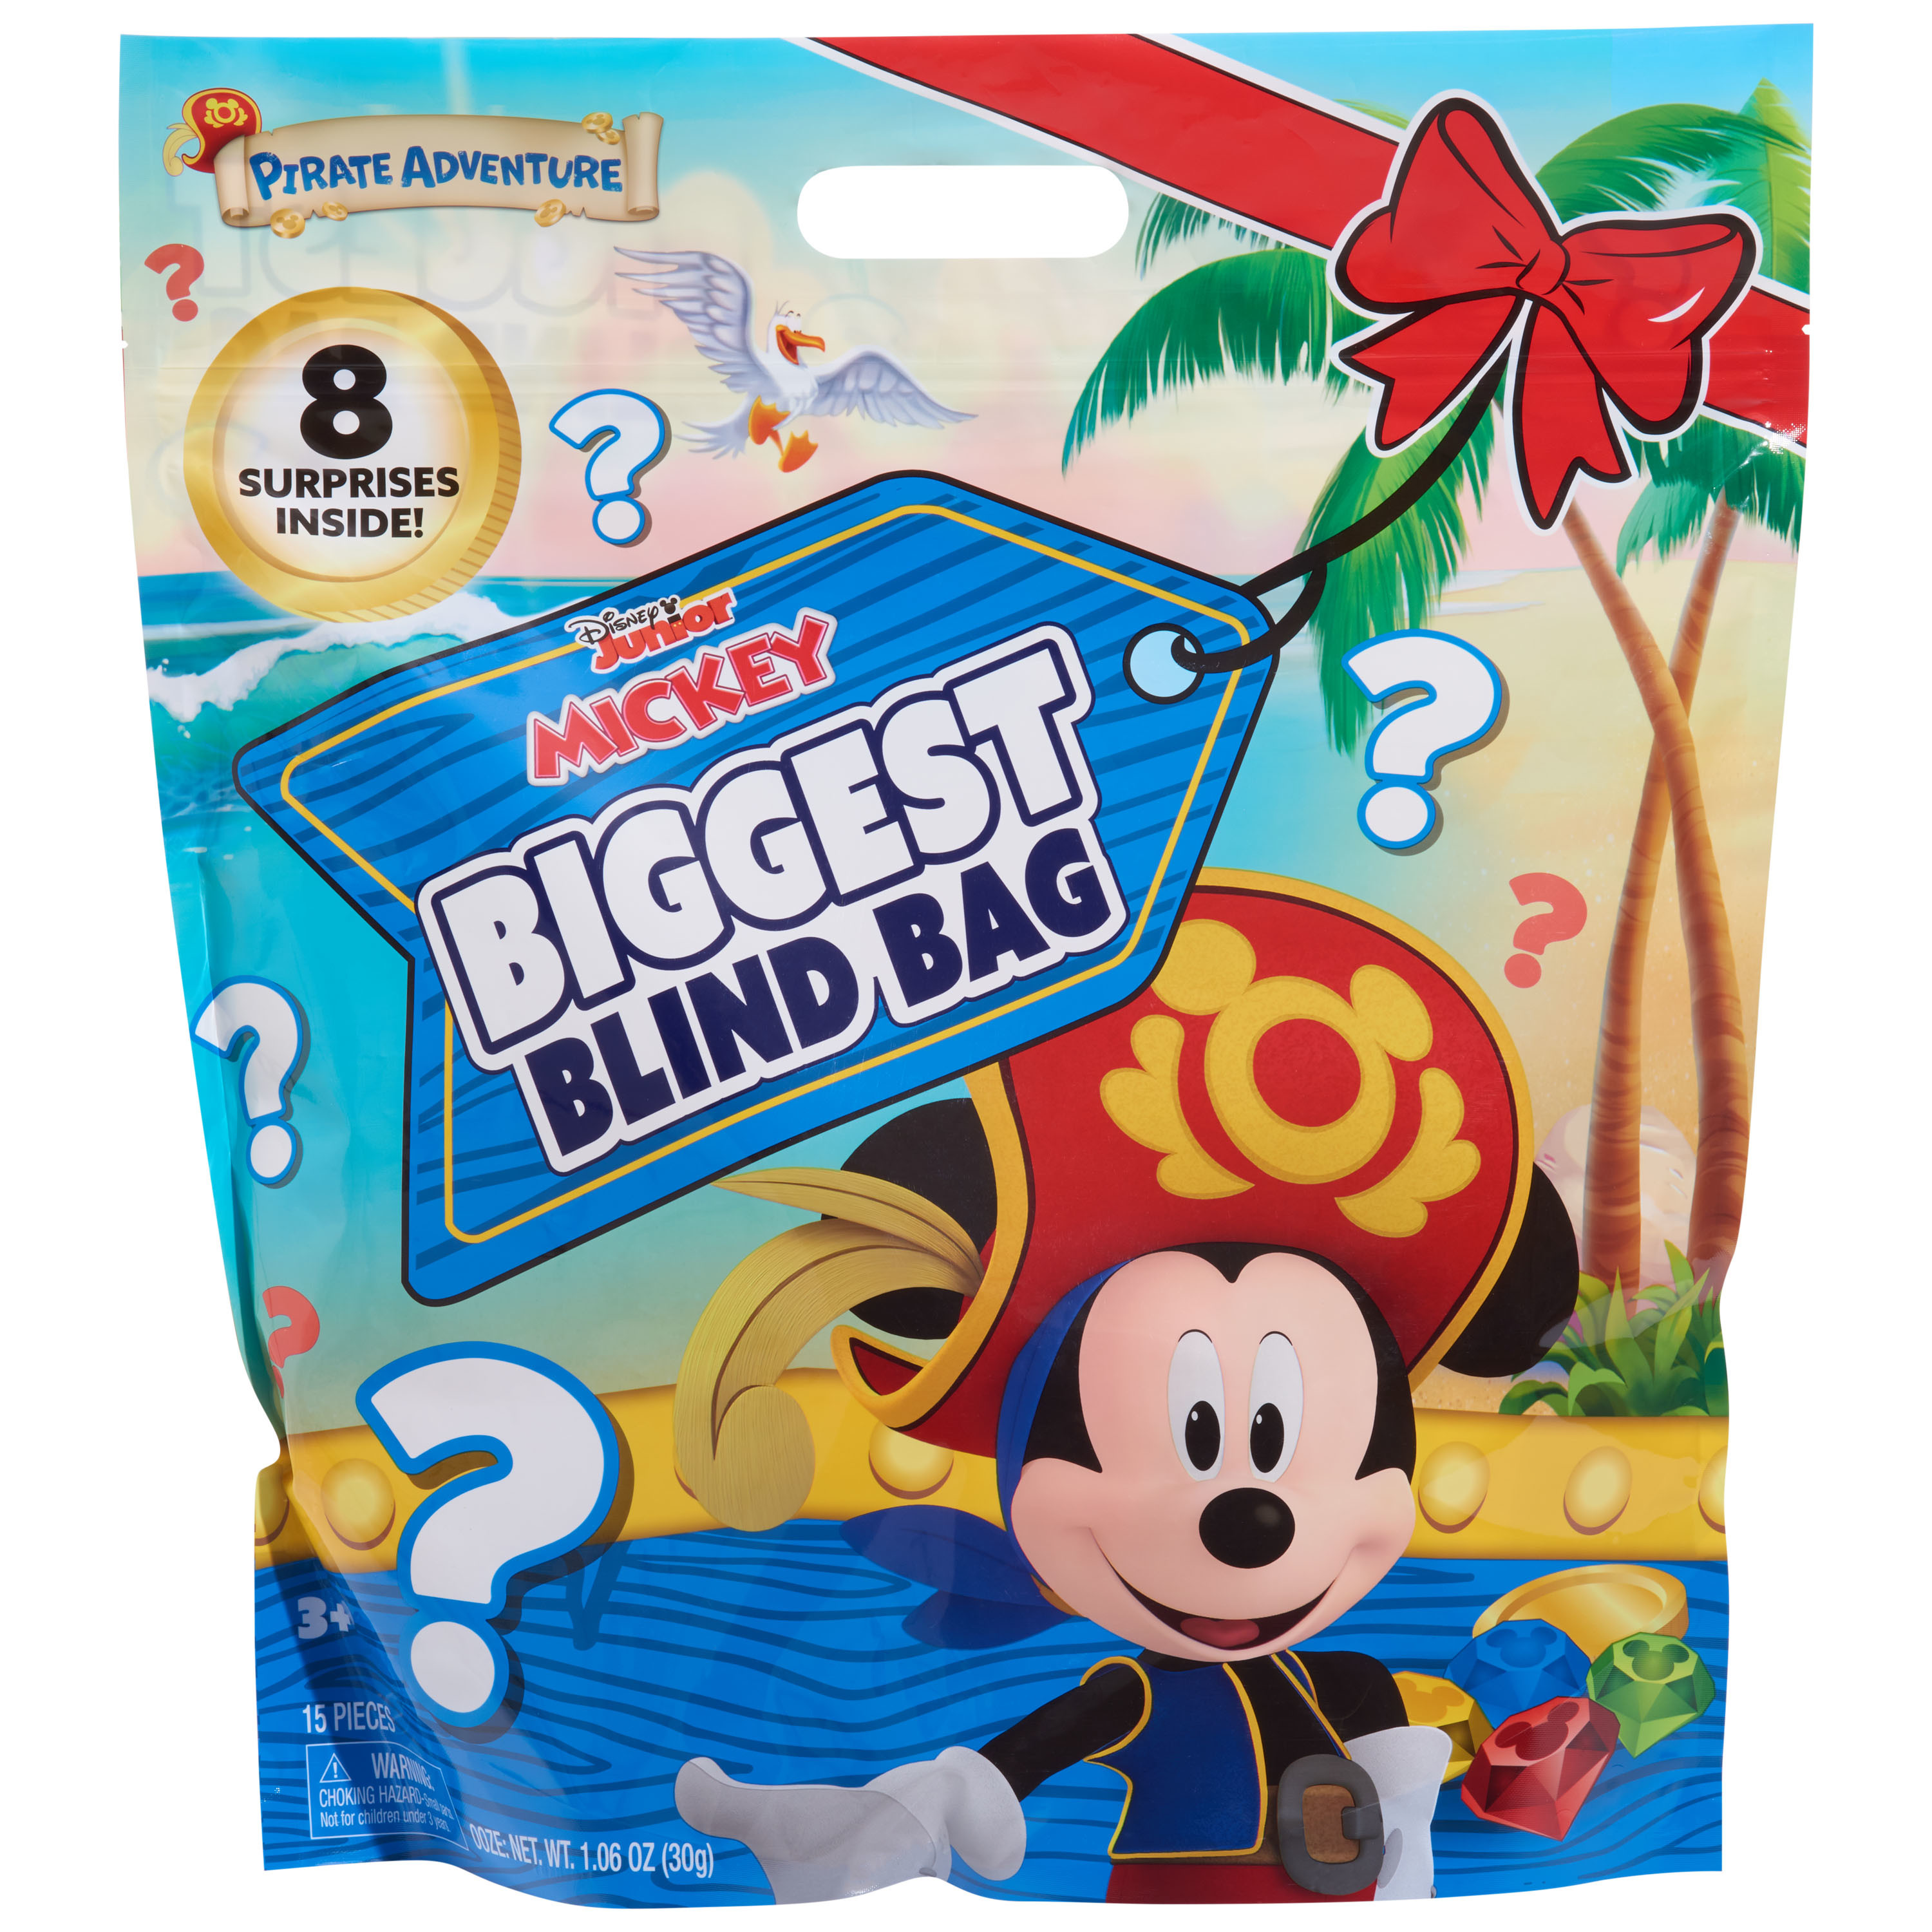 Disney Junior Mickey Mouse Pirate Adventure Biggest Blind Bag, Officially Licensed Kids Toys for Ages 3 Up, Gifts and Presents - image 1 of 5